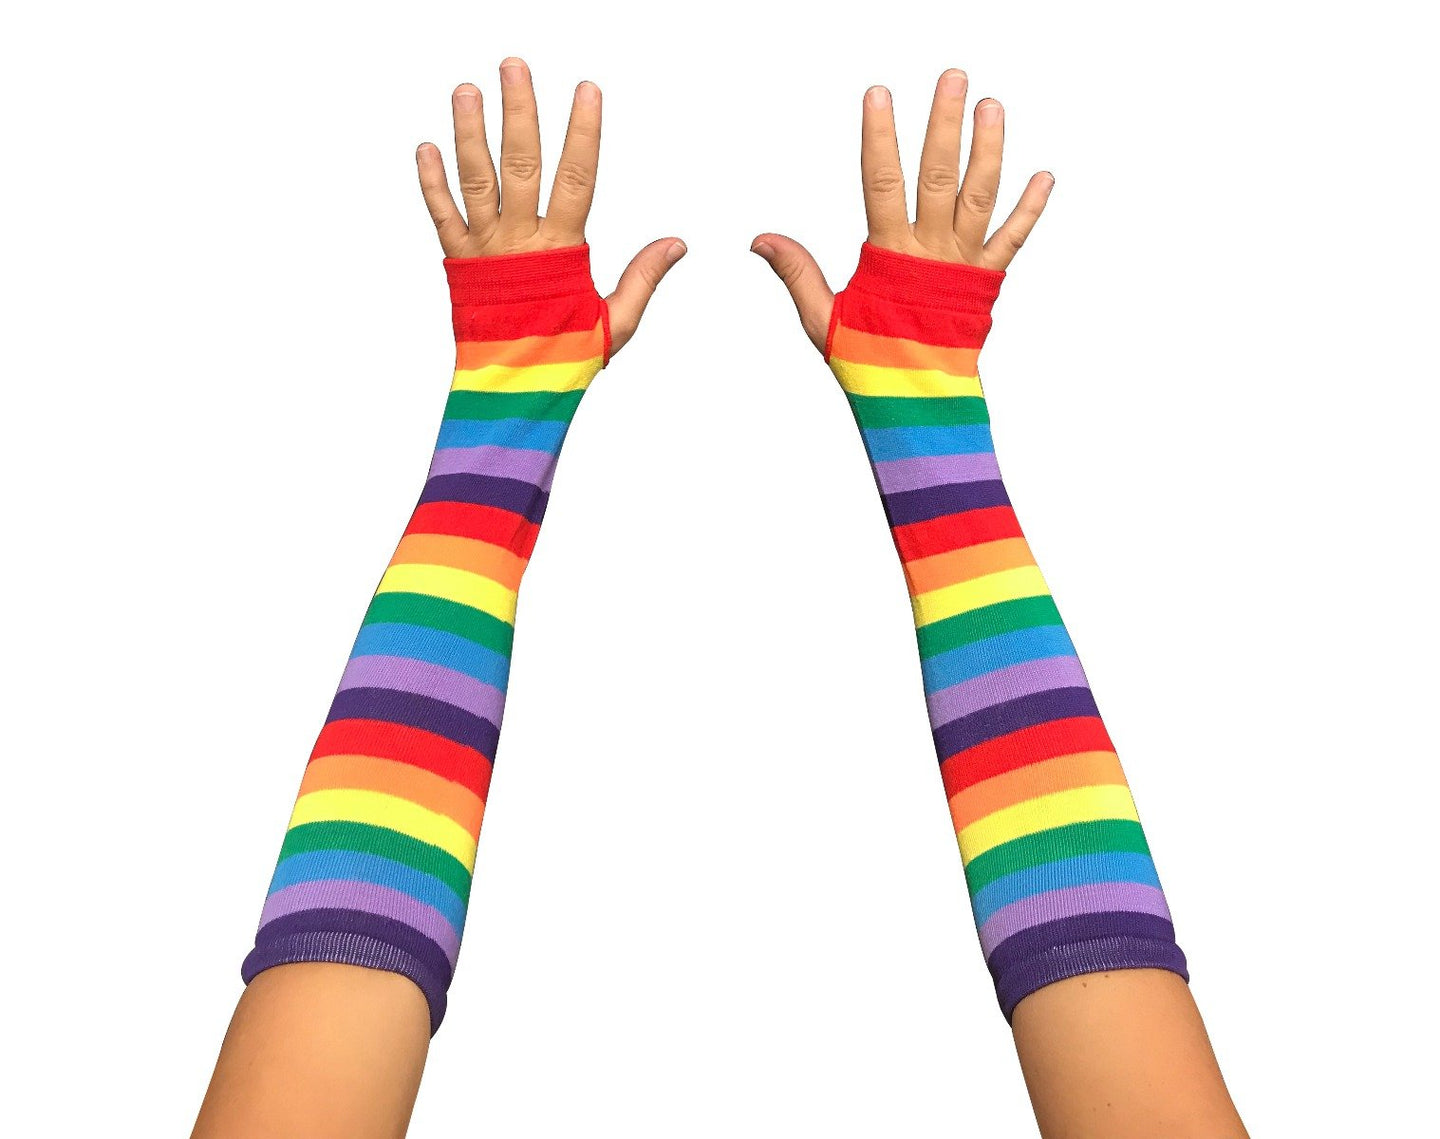 25 Pairs Rainbow Pride Fingerless Elbow Length Gloves (25 Pairs) - Fundraising For A Cause